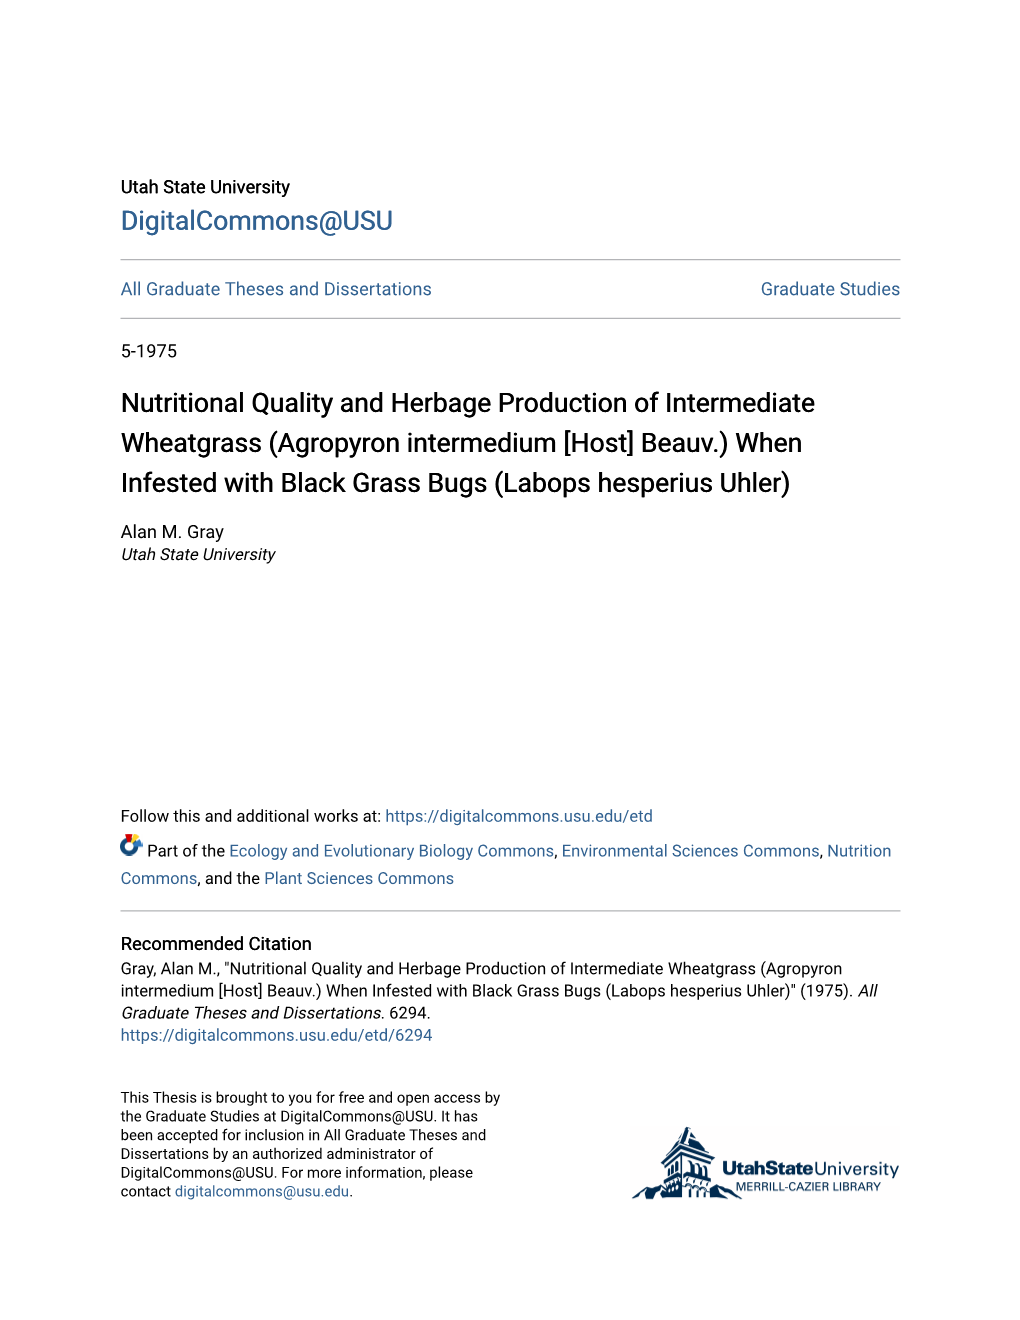 Nutritional Quality and Herbage Production of Intermediate